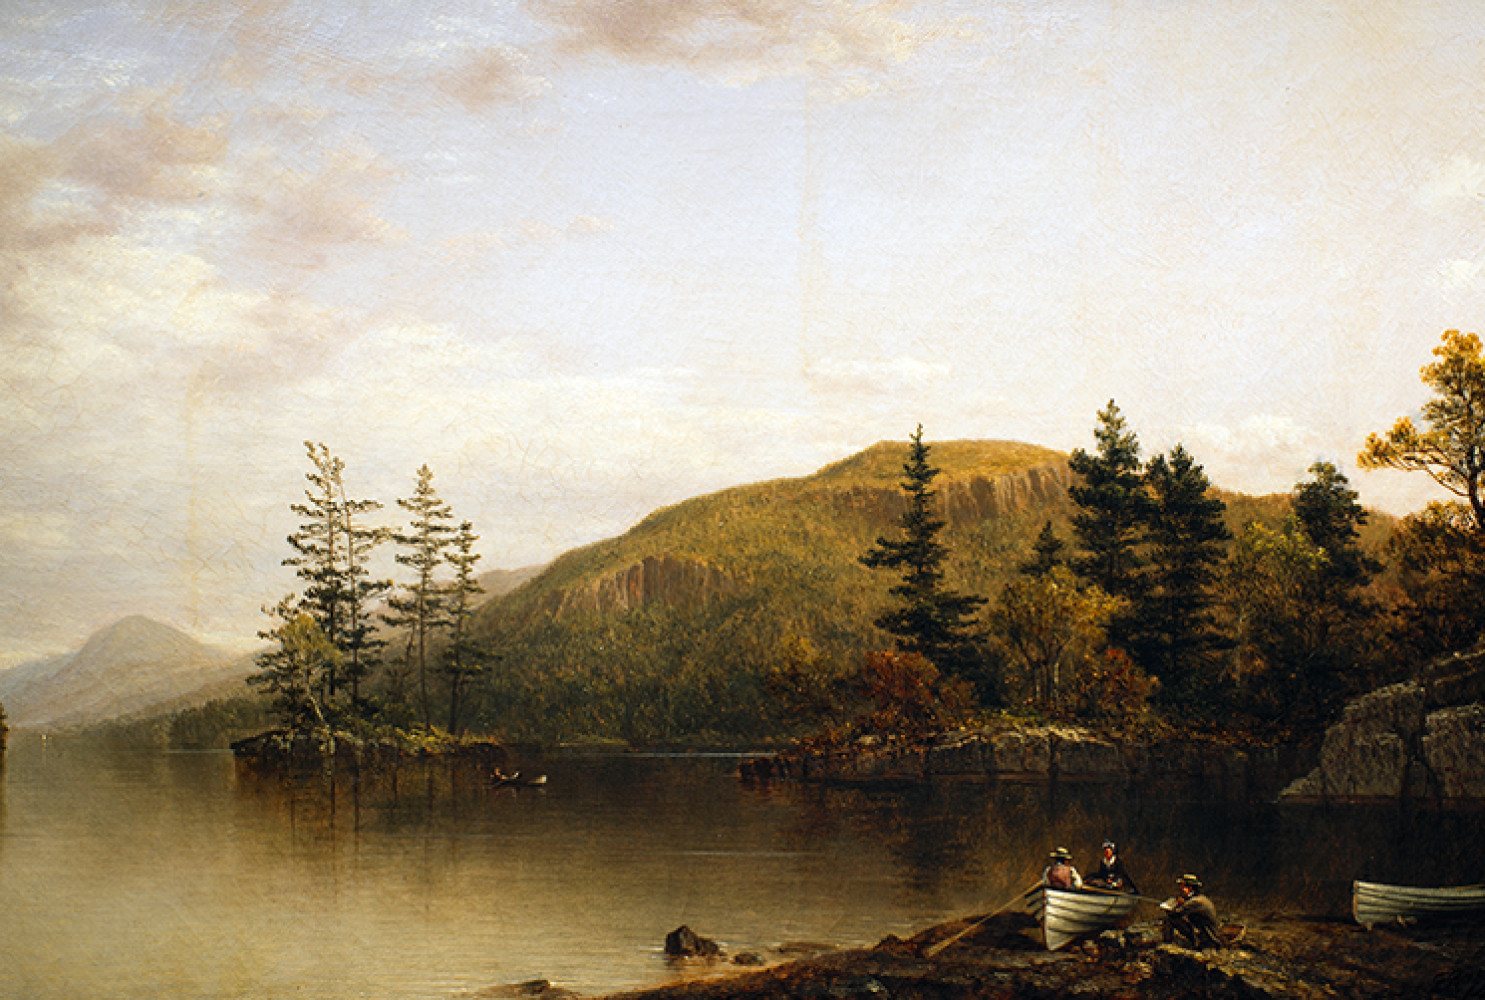 Shelving Rocks, Lake George from Hen and Chickens Island, 1874, by David Johnson (American, 1827-1908); oil on canvas; 16 1/8 x 28 1/2 inches; Courtesy of the Higdon Collection